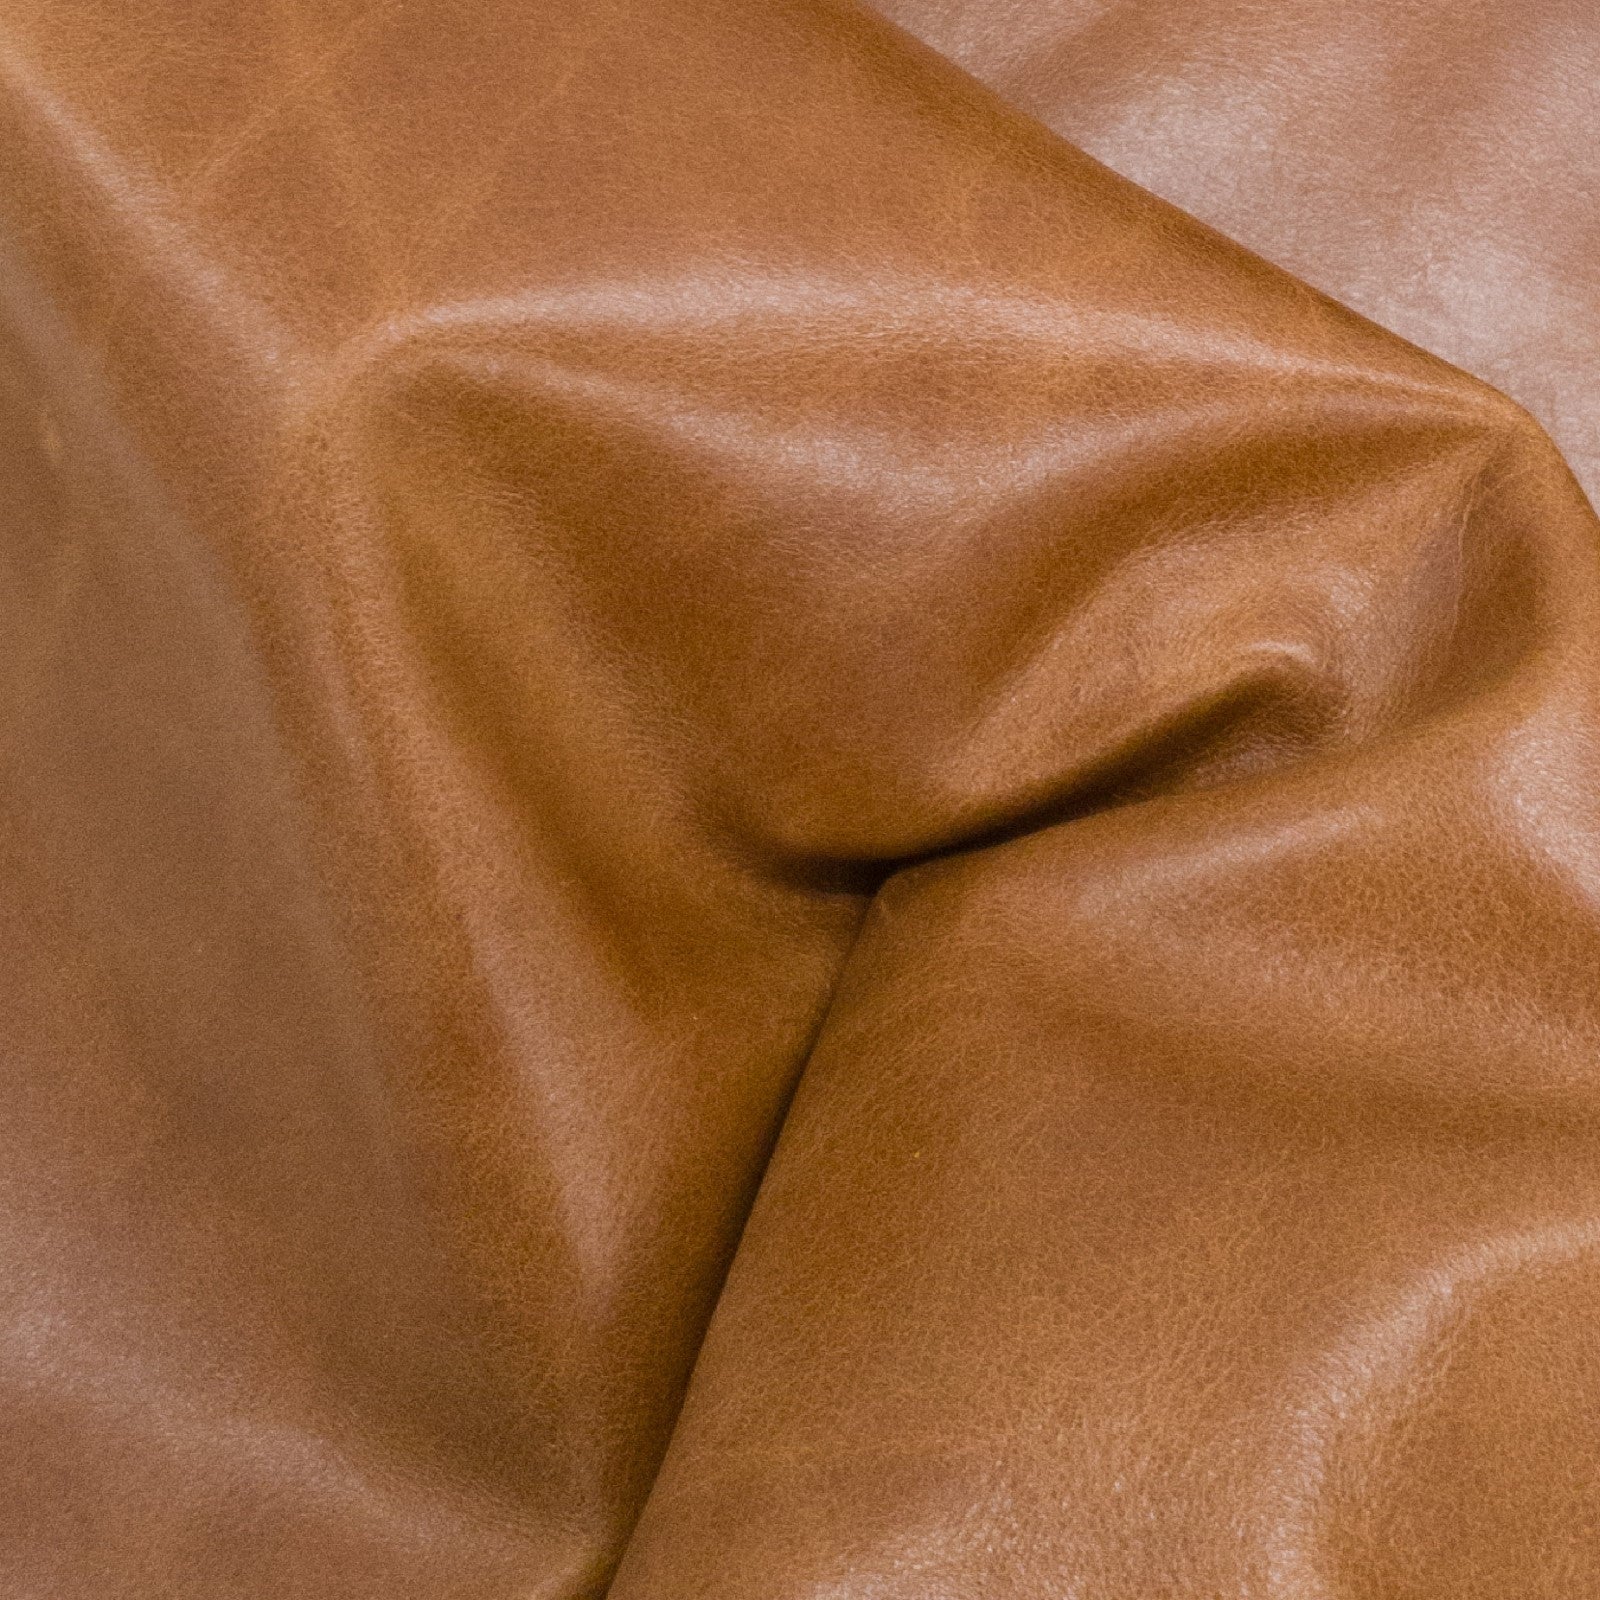 Light-Medium Brown, 2-4 oz, 3-10 Sq Ft, Upholstery Cow Project Pieces, Camel (2-3oz) / 7-10 Sq Ft | The Leather Guy